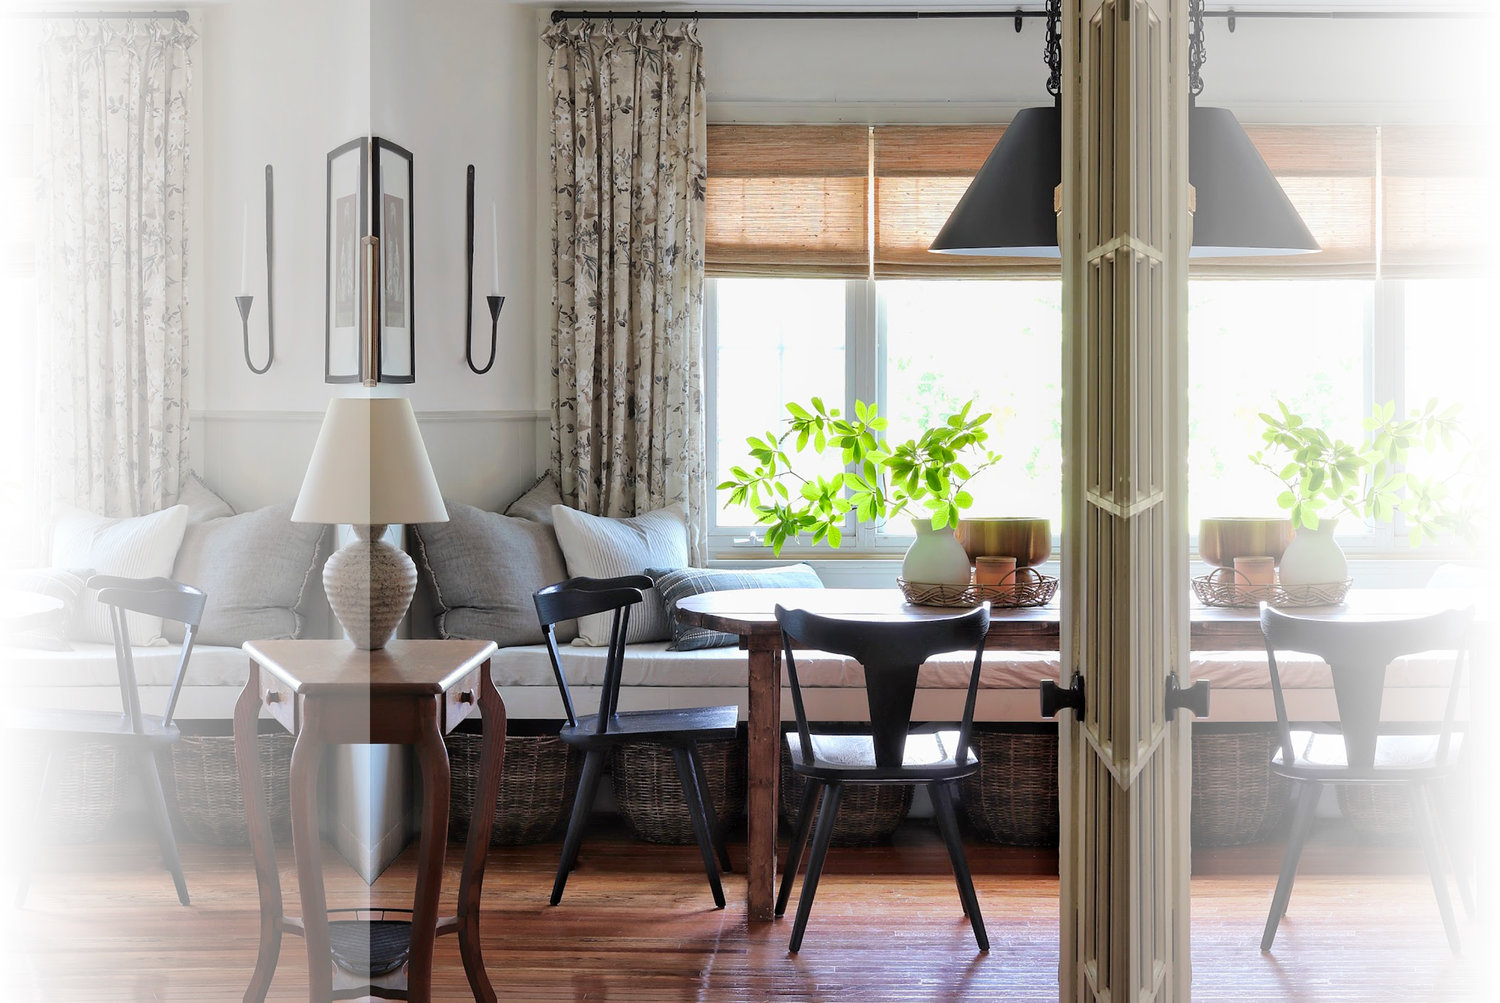 Black dining chairs connect with the light fixture above